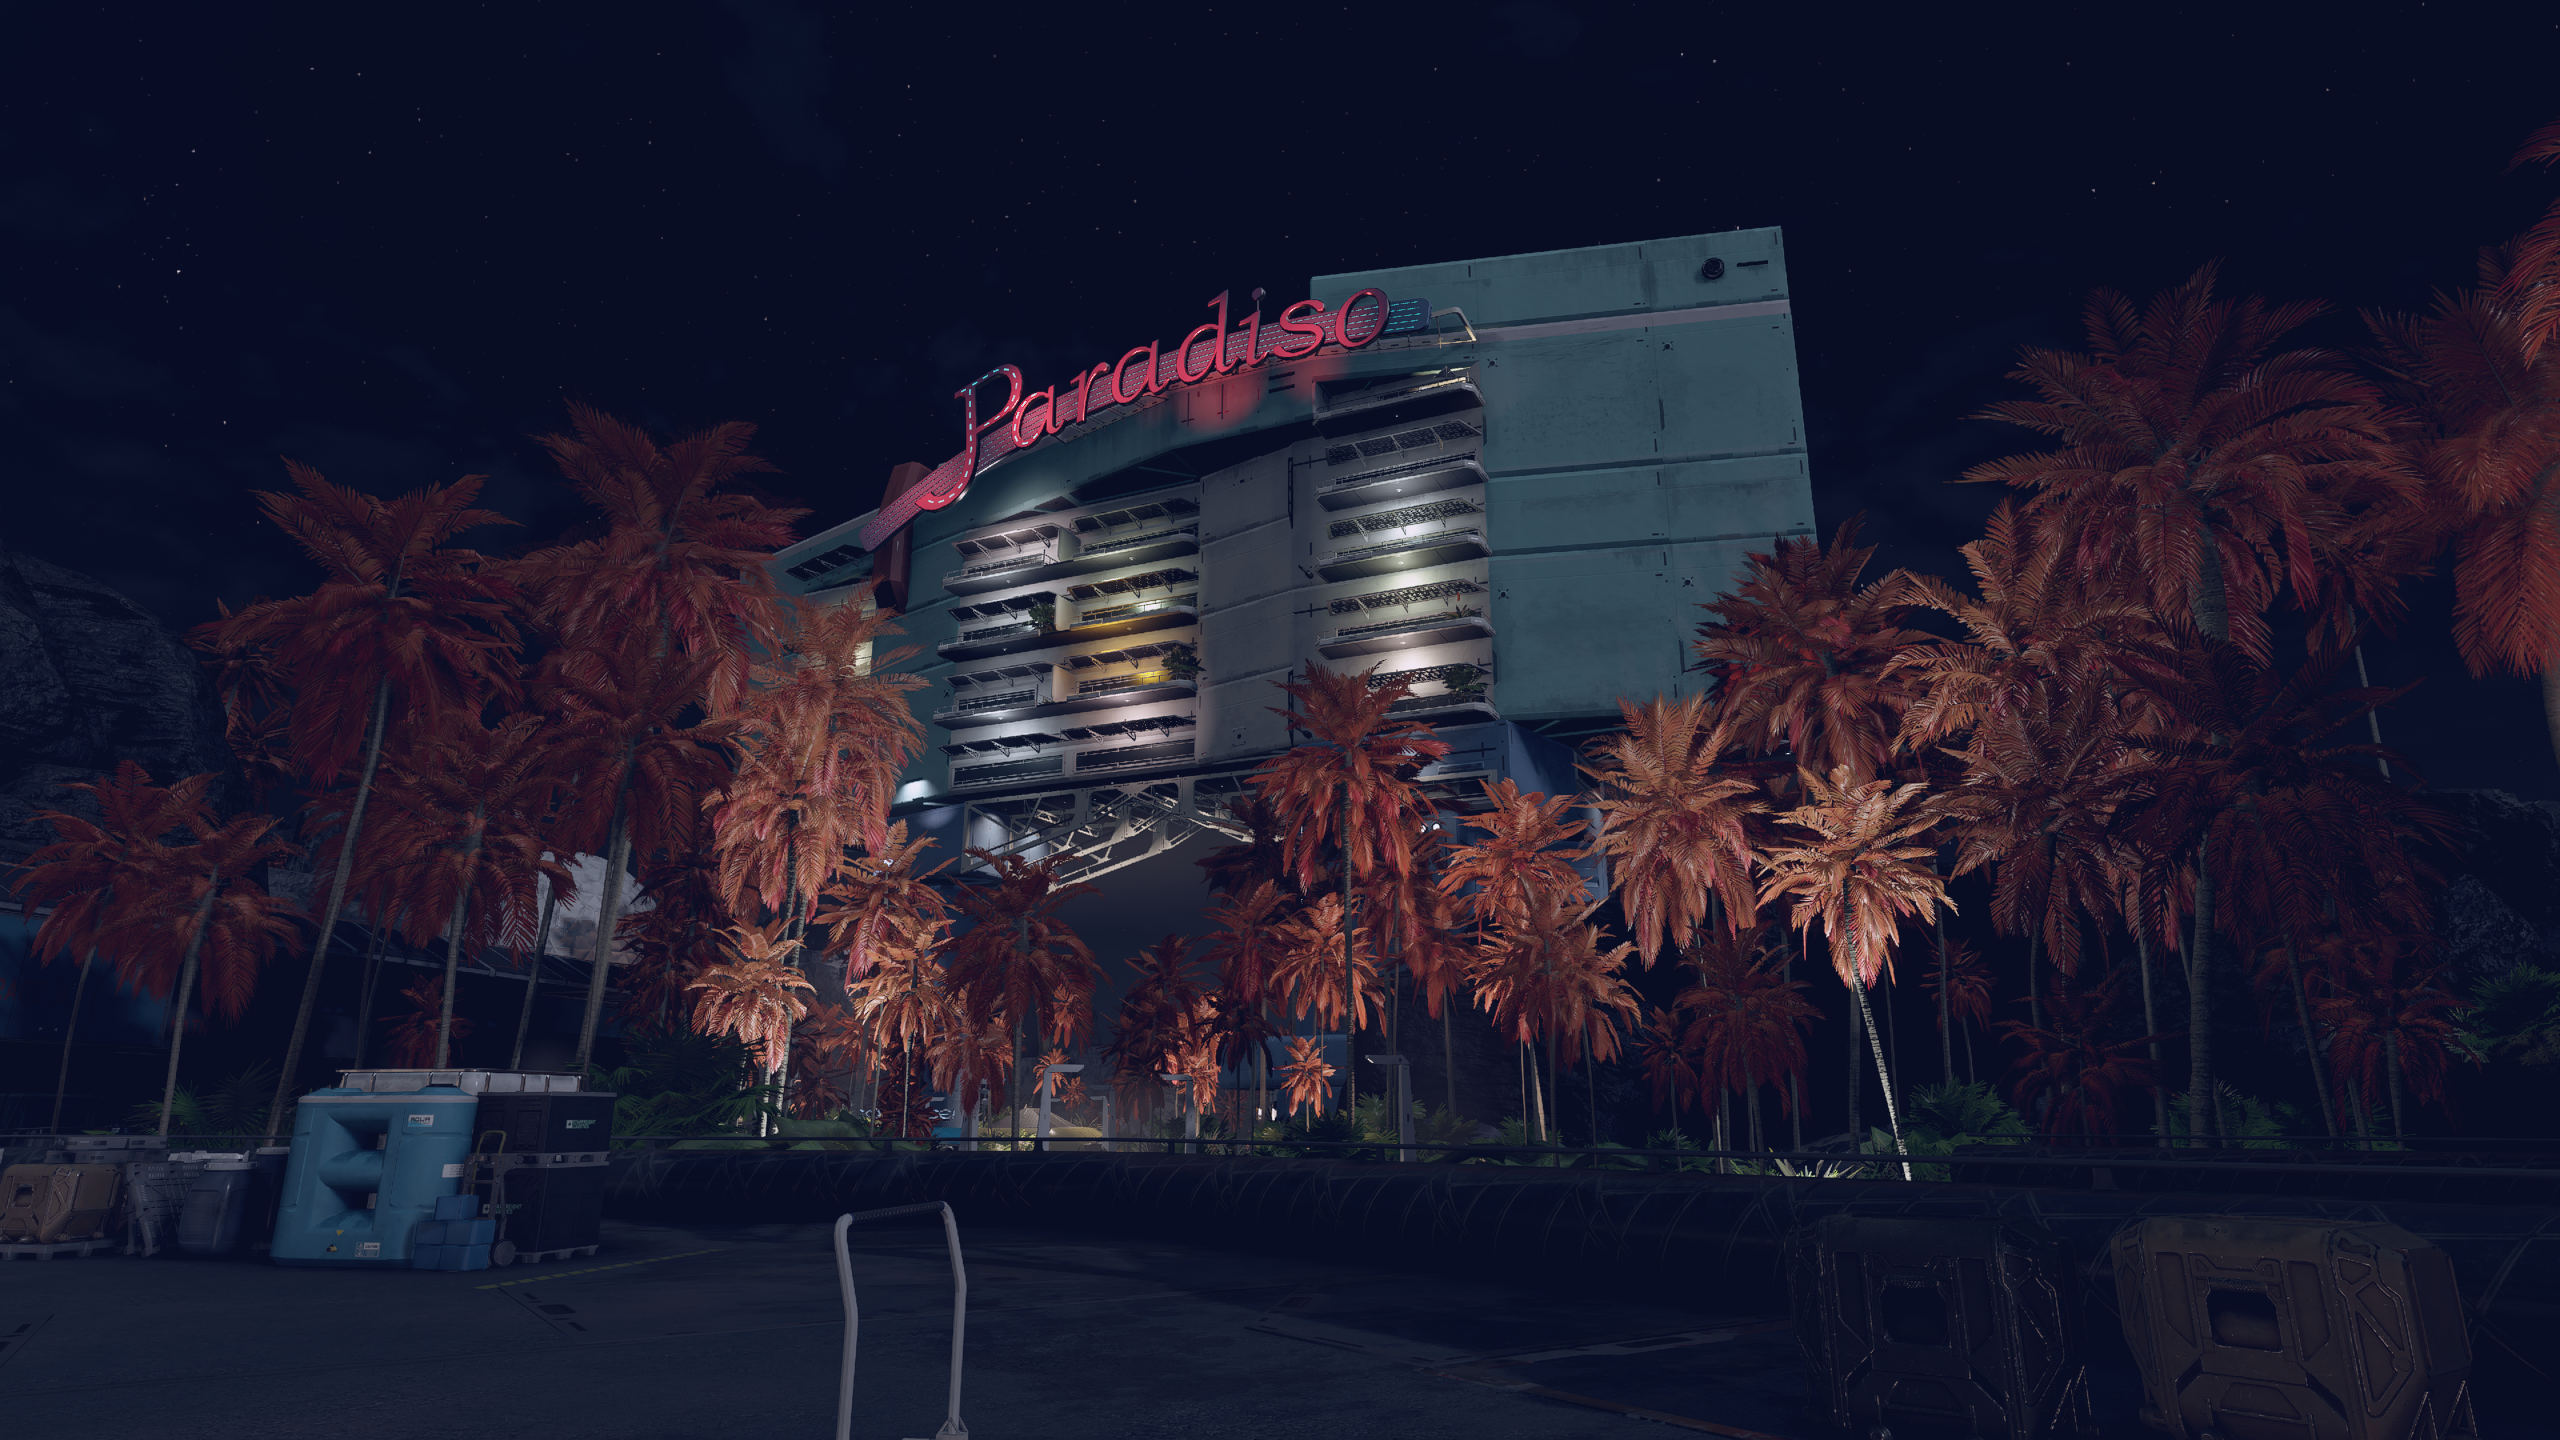 The Paradiso hotel on the Porrima II planet in Starfield